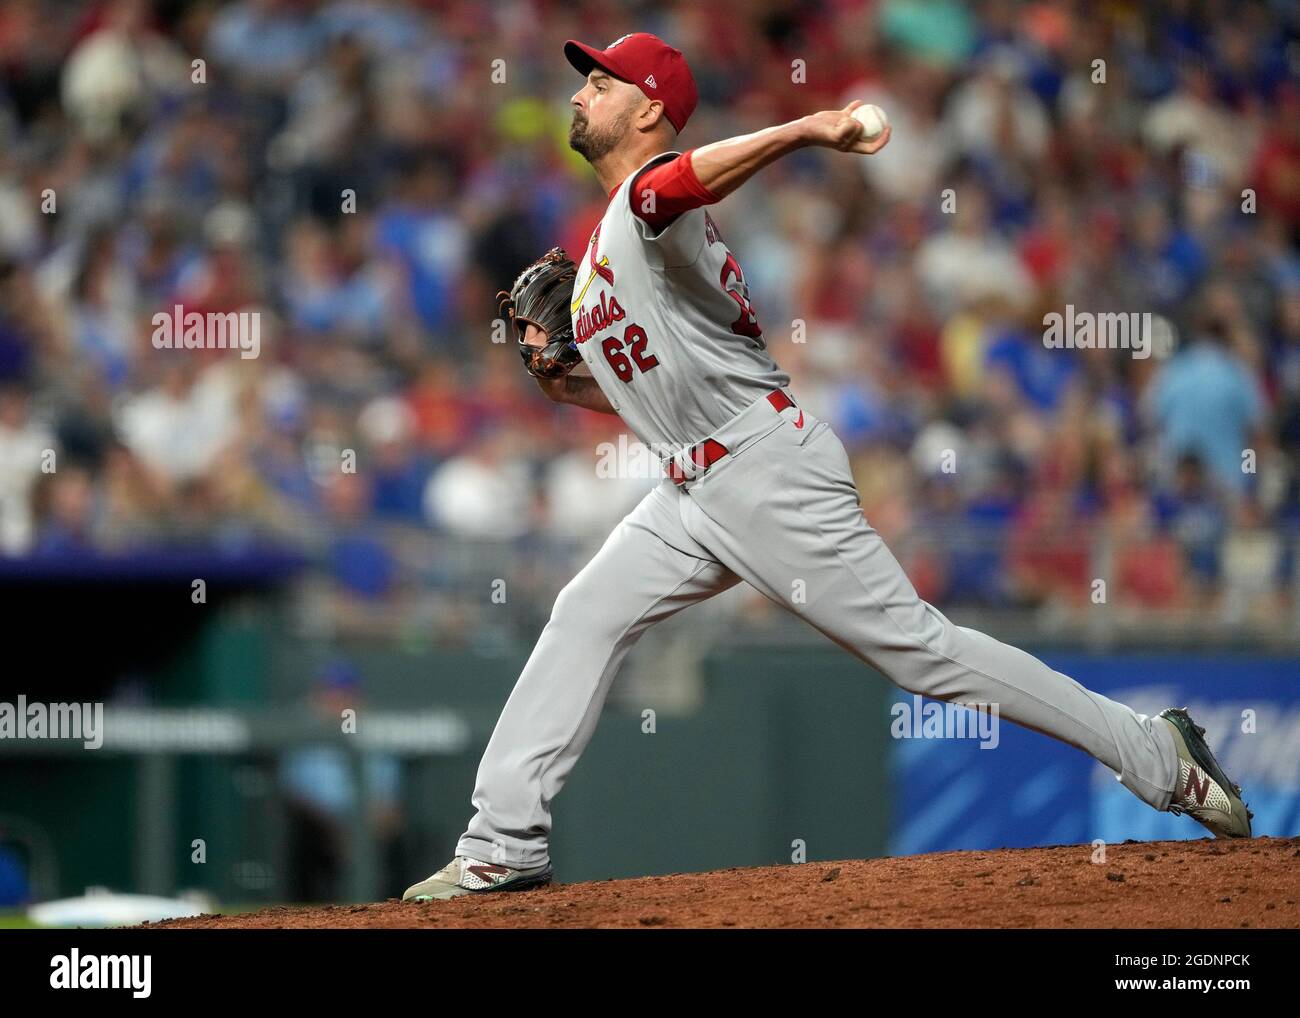 Aug 13, 2021: St. Louis Cardinals relief pitcher T.J. McFarland (62) pitches in relief at Kauffman Stadium in Kansas City, MO. Cardinals defeated the Royals 6-0. Jon Robichaud/CSM. Stock Photo